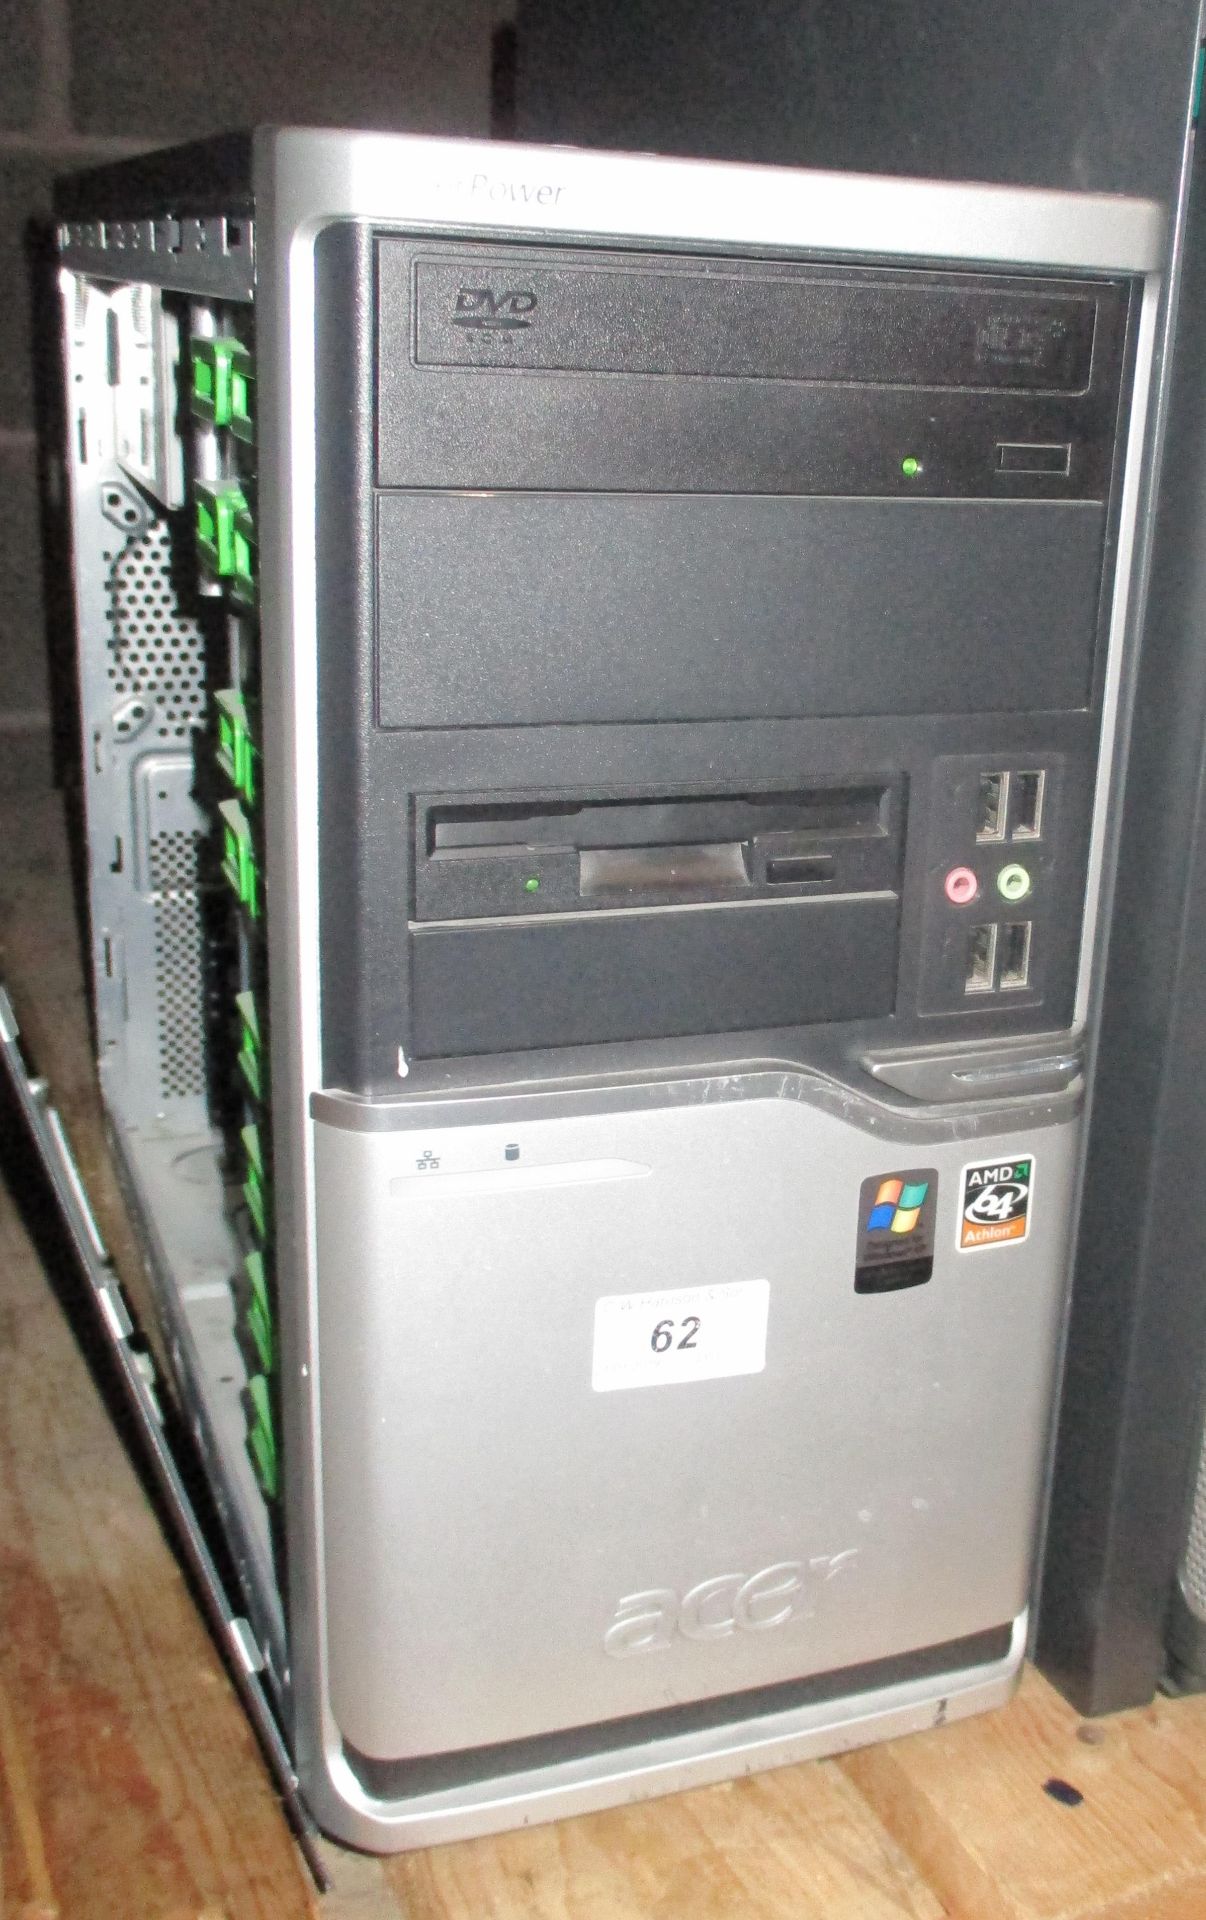 An Acer Acerpower tower computer - no power lead